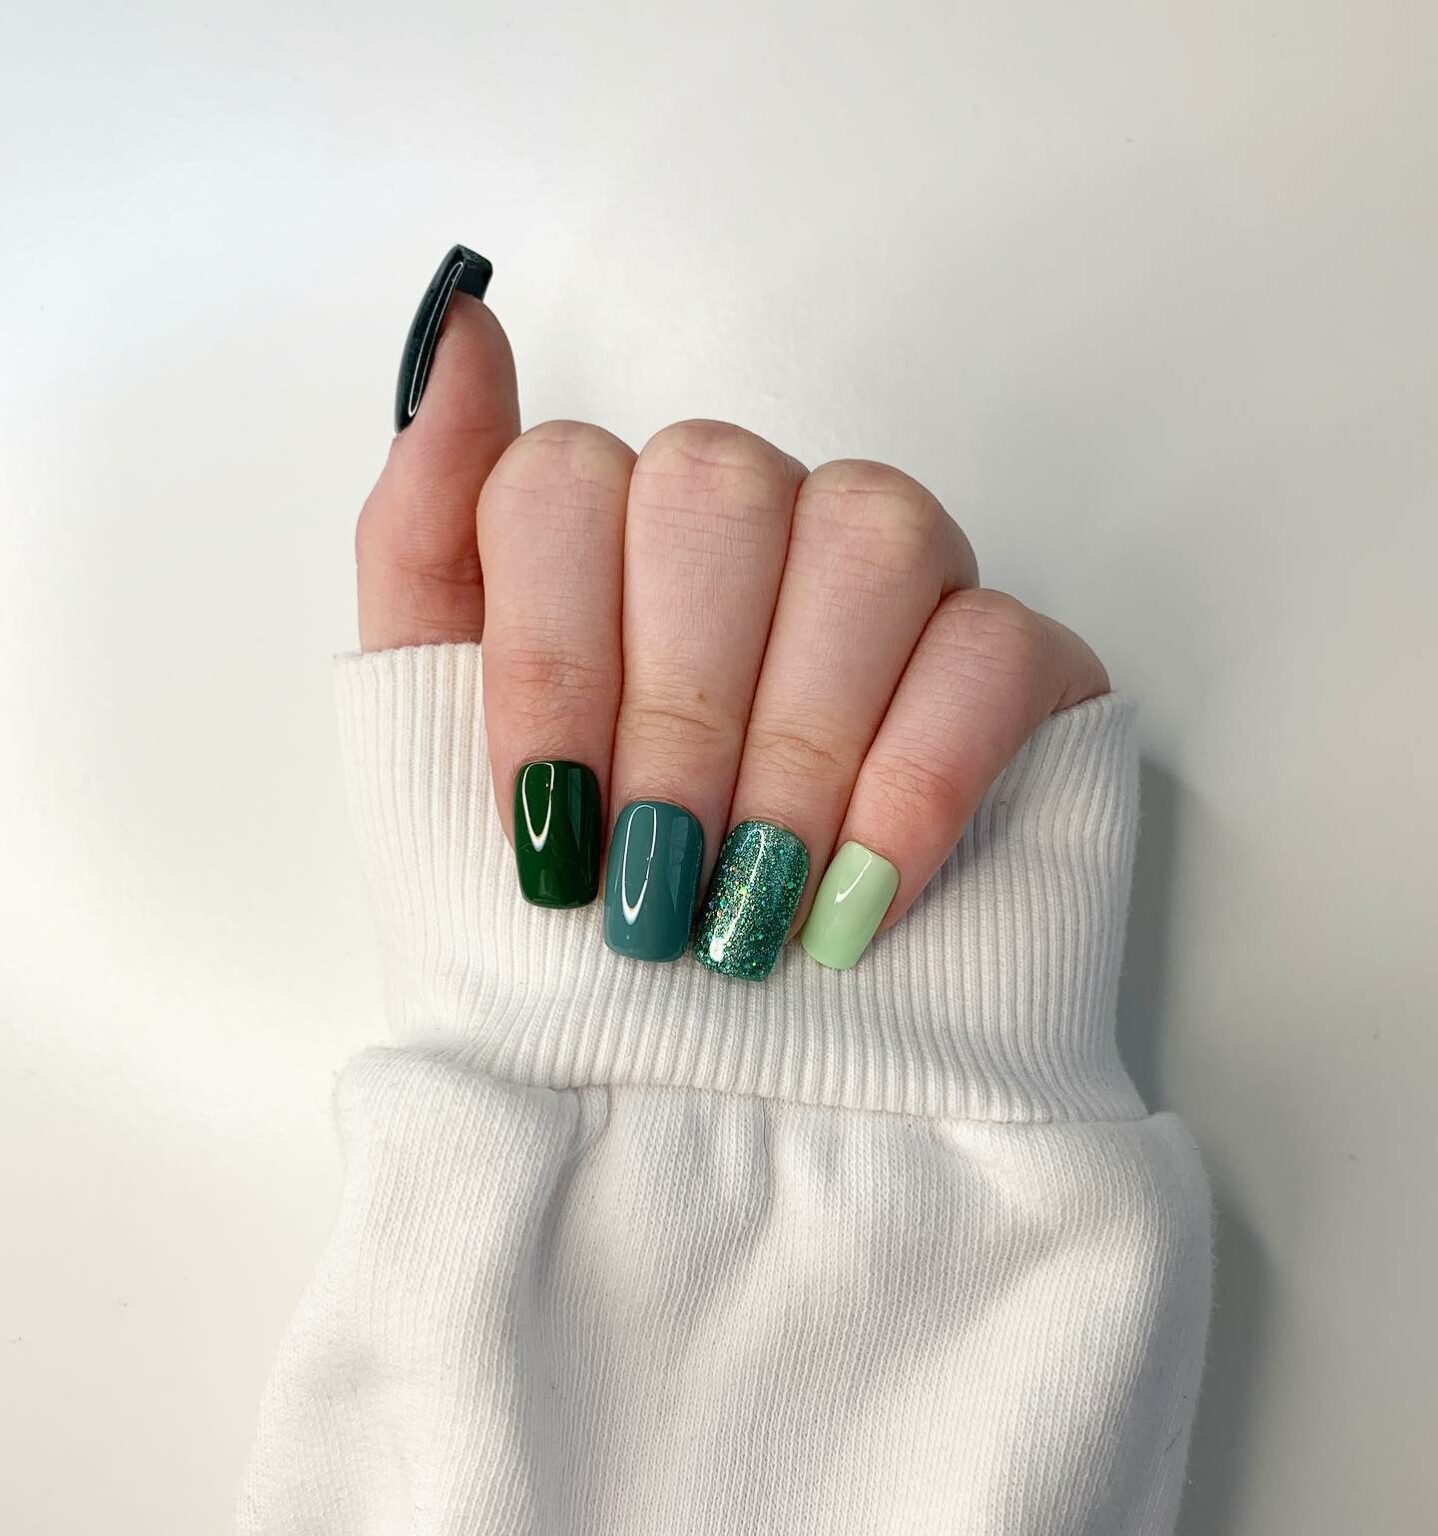 Olive Green Ombre Nails: 16+ Looks to Steal This Season - Nail Designs ...